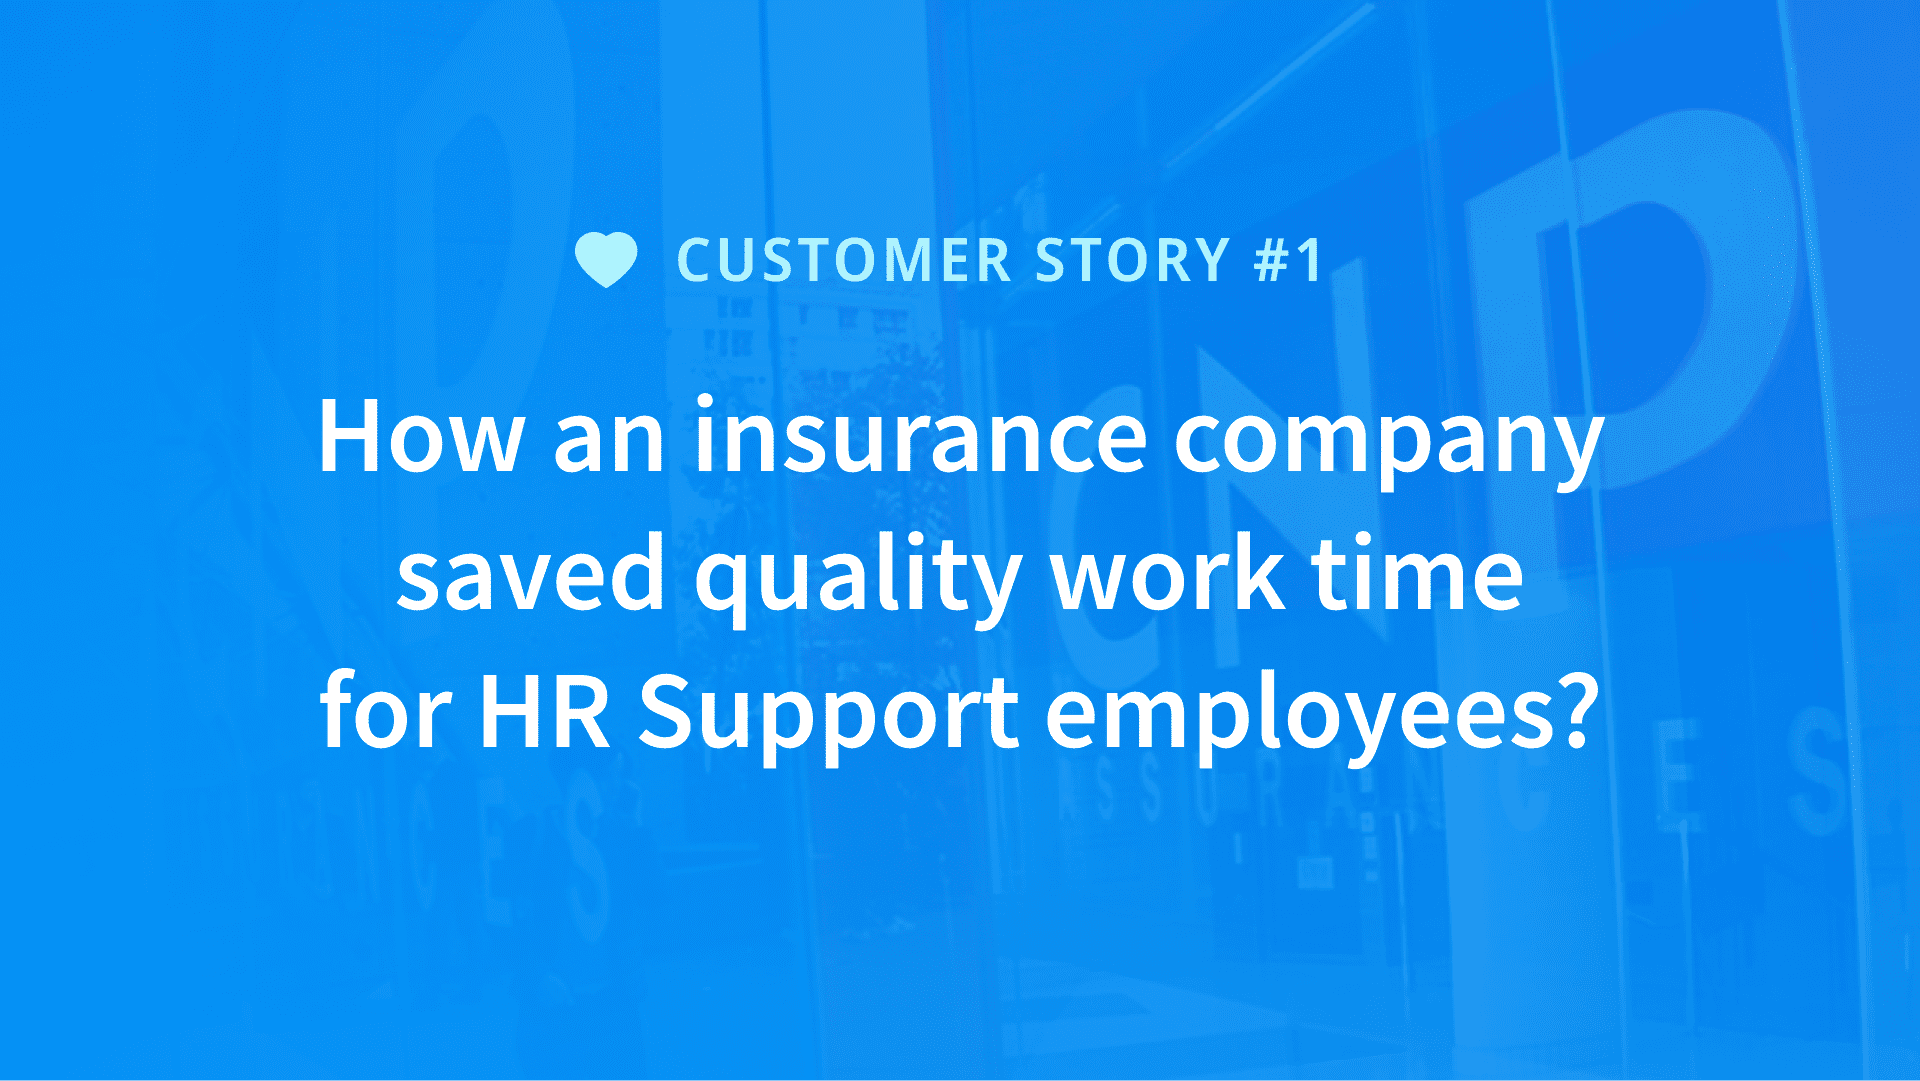 How an insurance company saved quality work time for HR Support employees